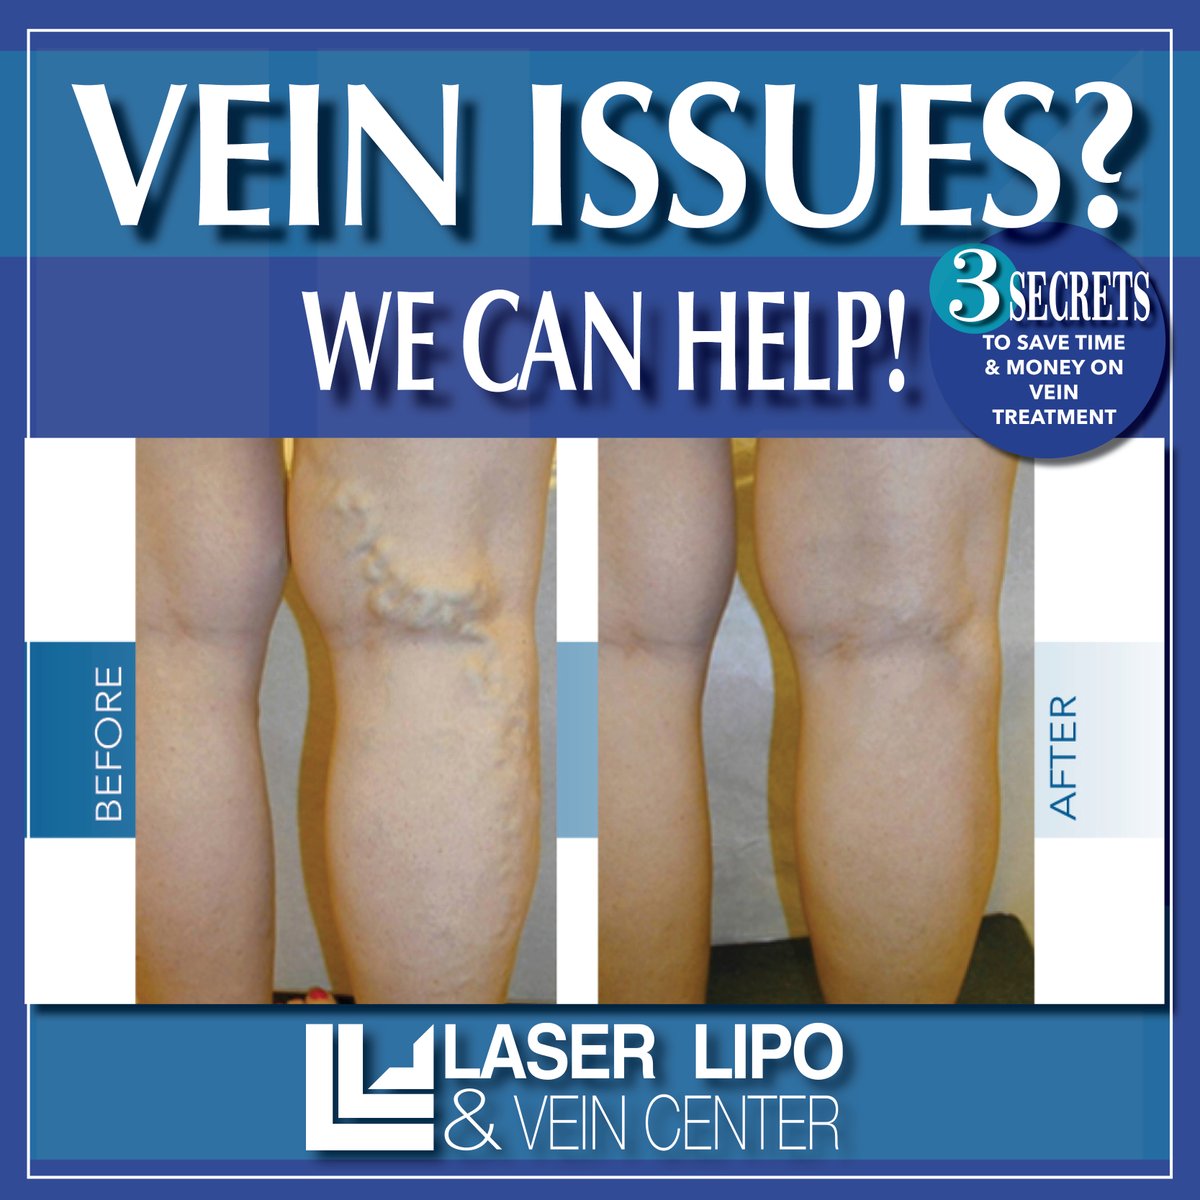 Don't let vein issues put a damper on your summer plans! ☀️
If you're tired of dealing with leg discomfort or swelling, it's time to take action. Call us at 636-614-1665 to schedule your consultation and start feeling better for summer!

#VeinTreatments #VeinDisease #LLVC